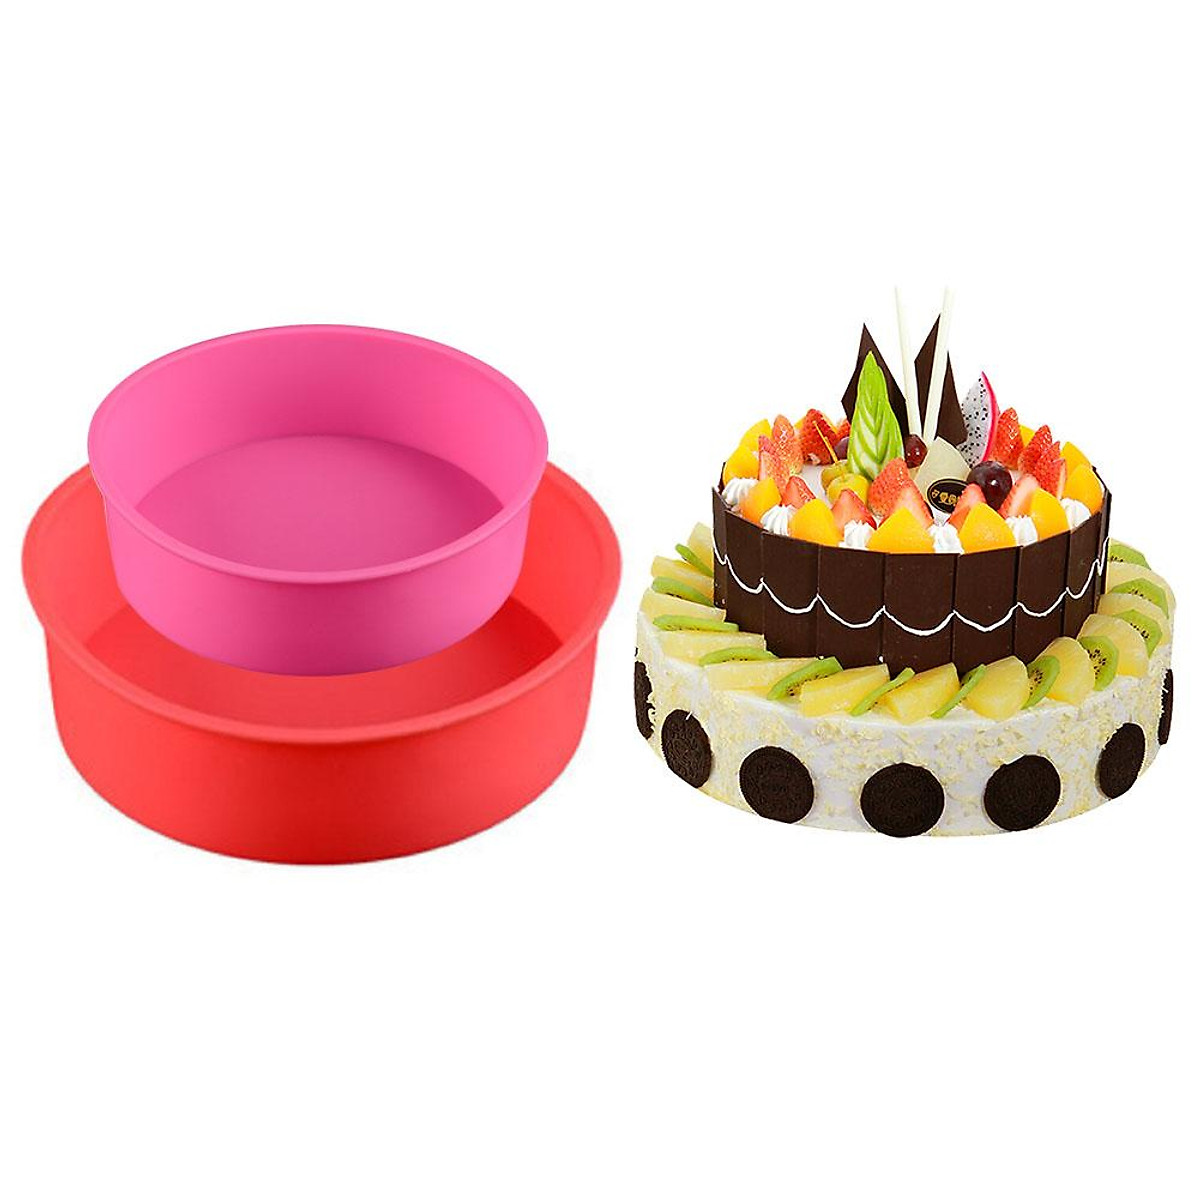 Buy Aluminium Cake Tin Mold - Heavy Duty - Round - 7 inches online in India  at best price